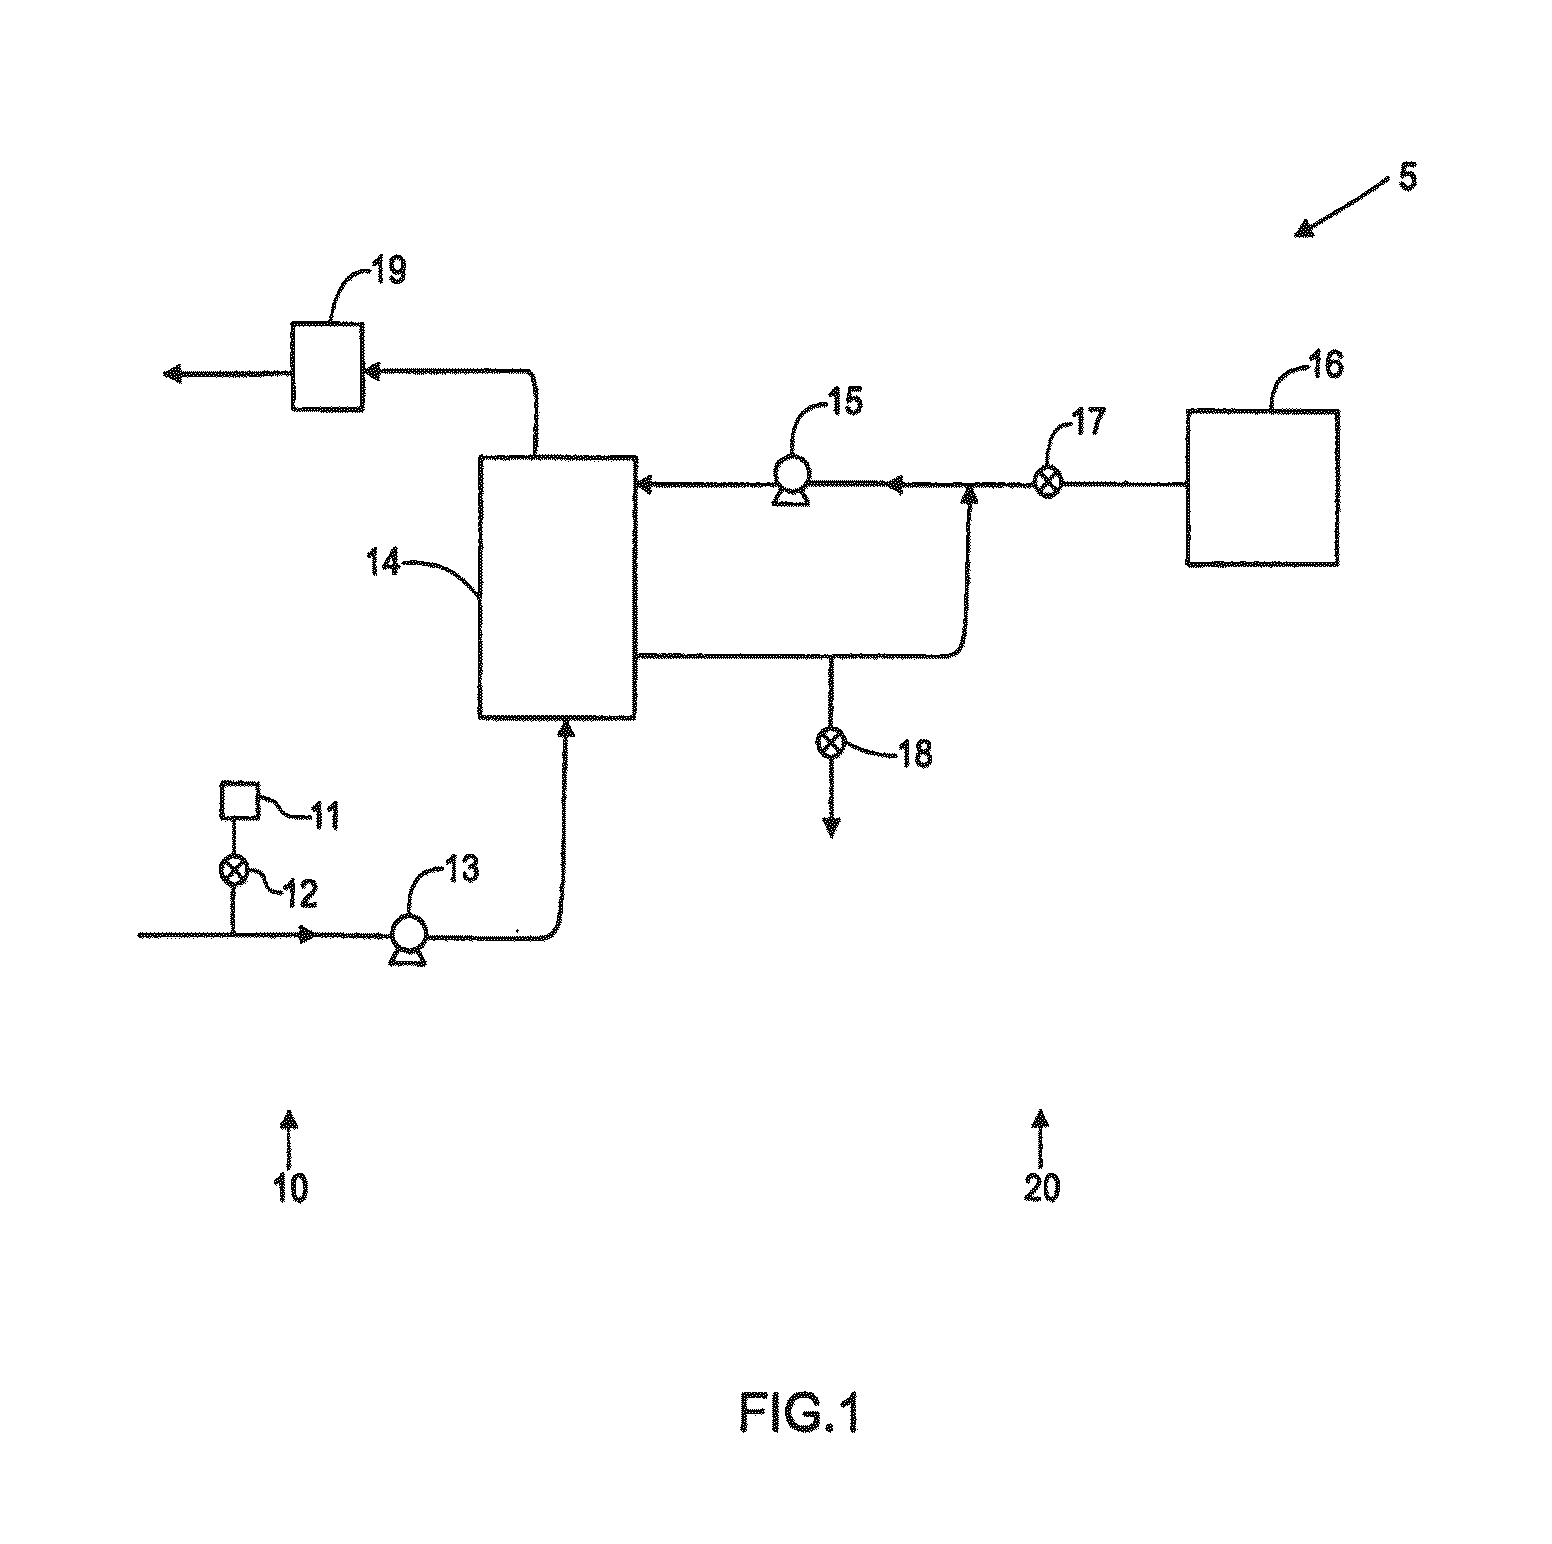 Blood treatment systems and methods